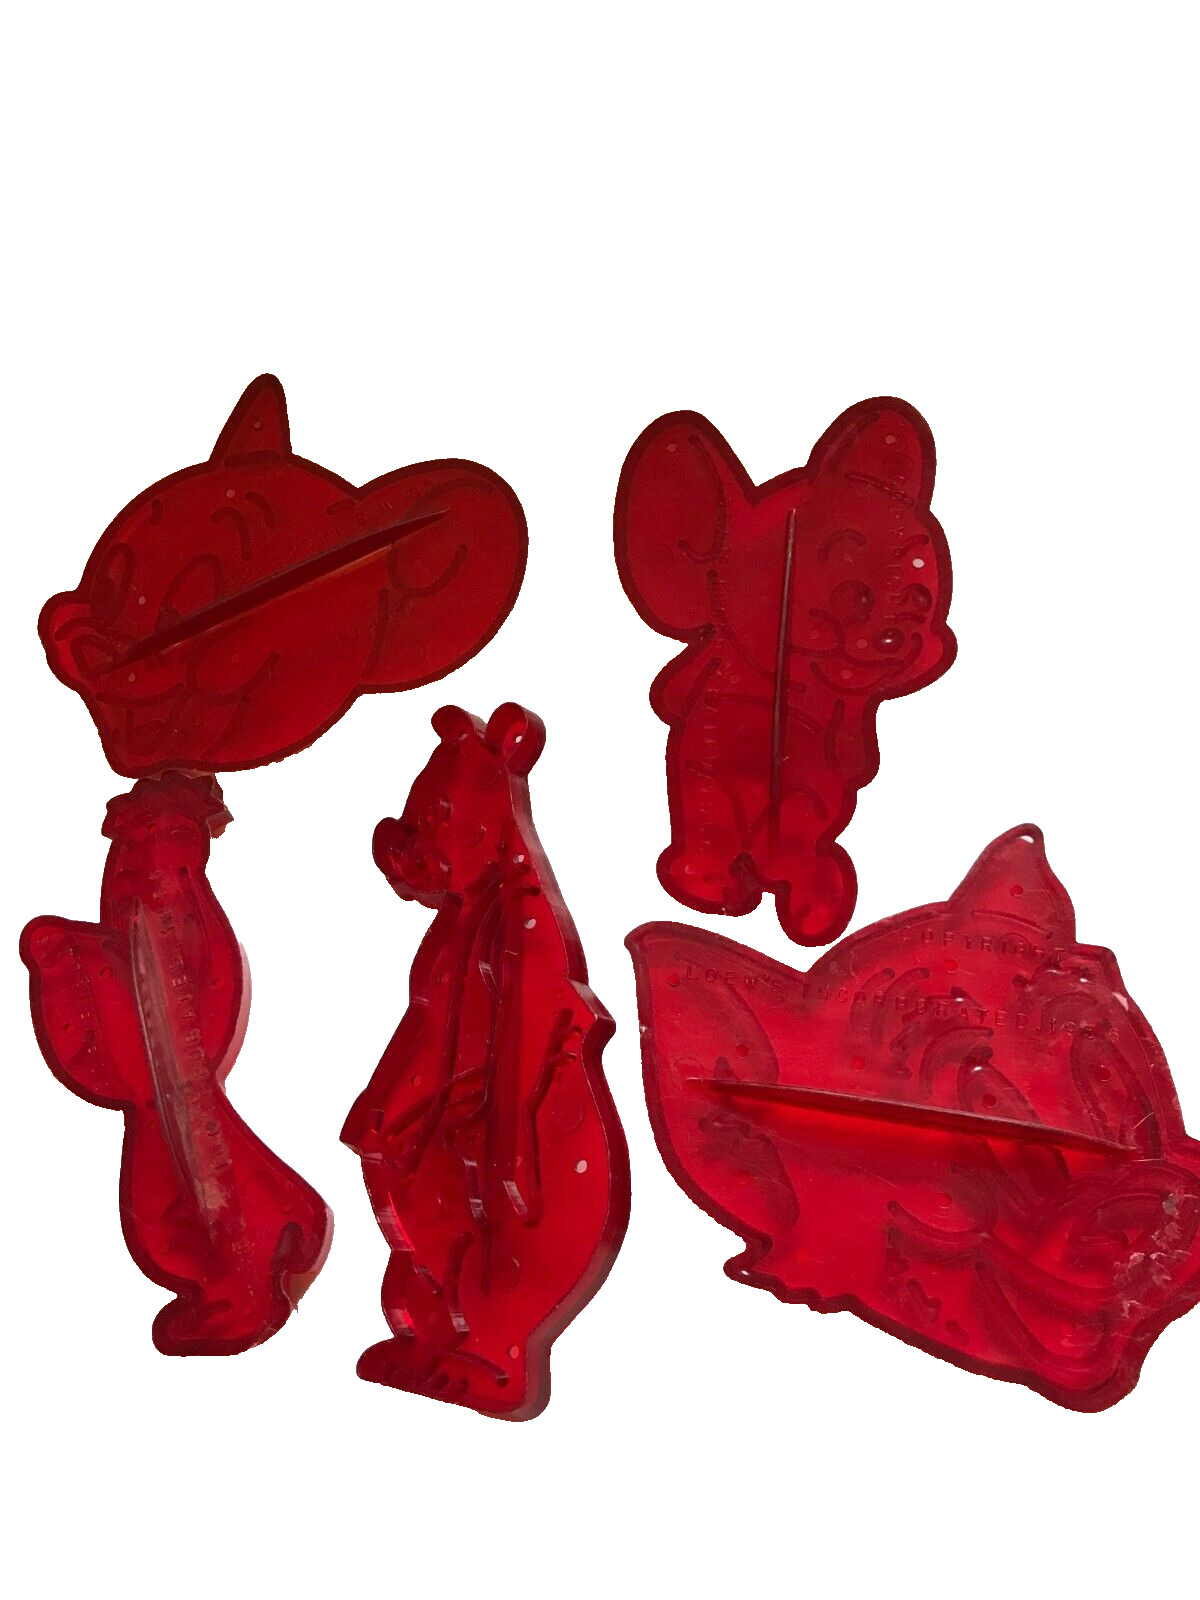 SET OF 5 1956 LOEW'S RED PLASTIC COOKIE CUTTERS